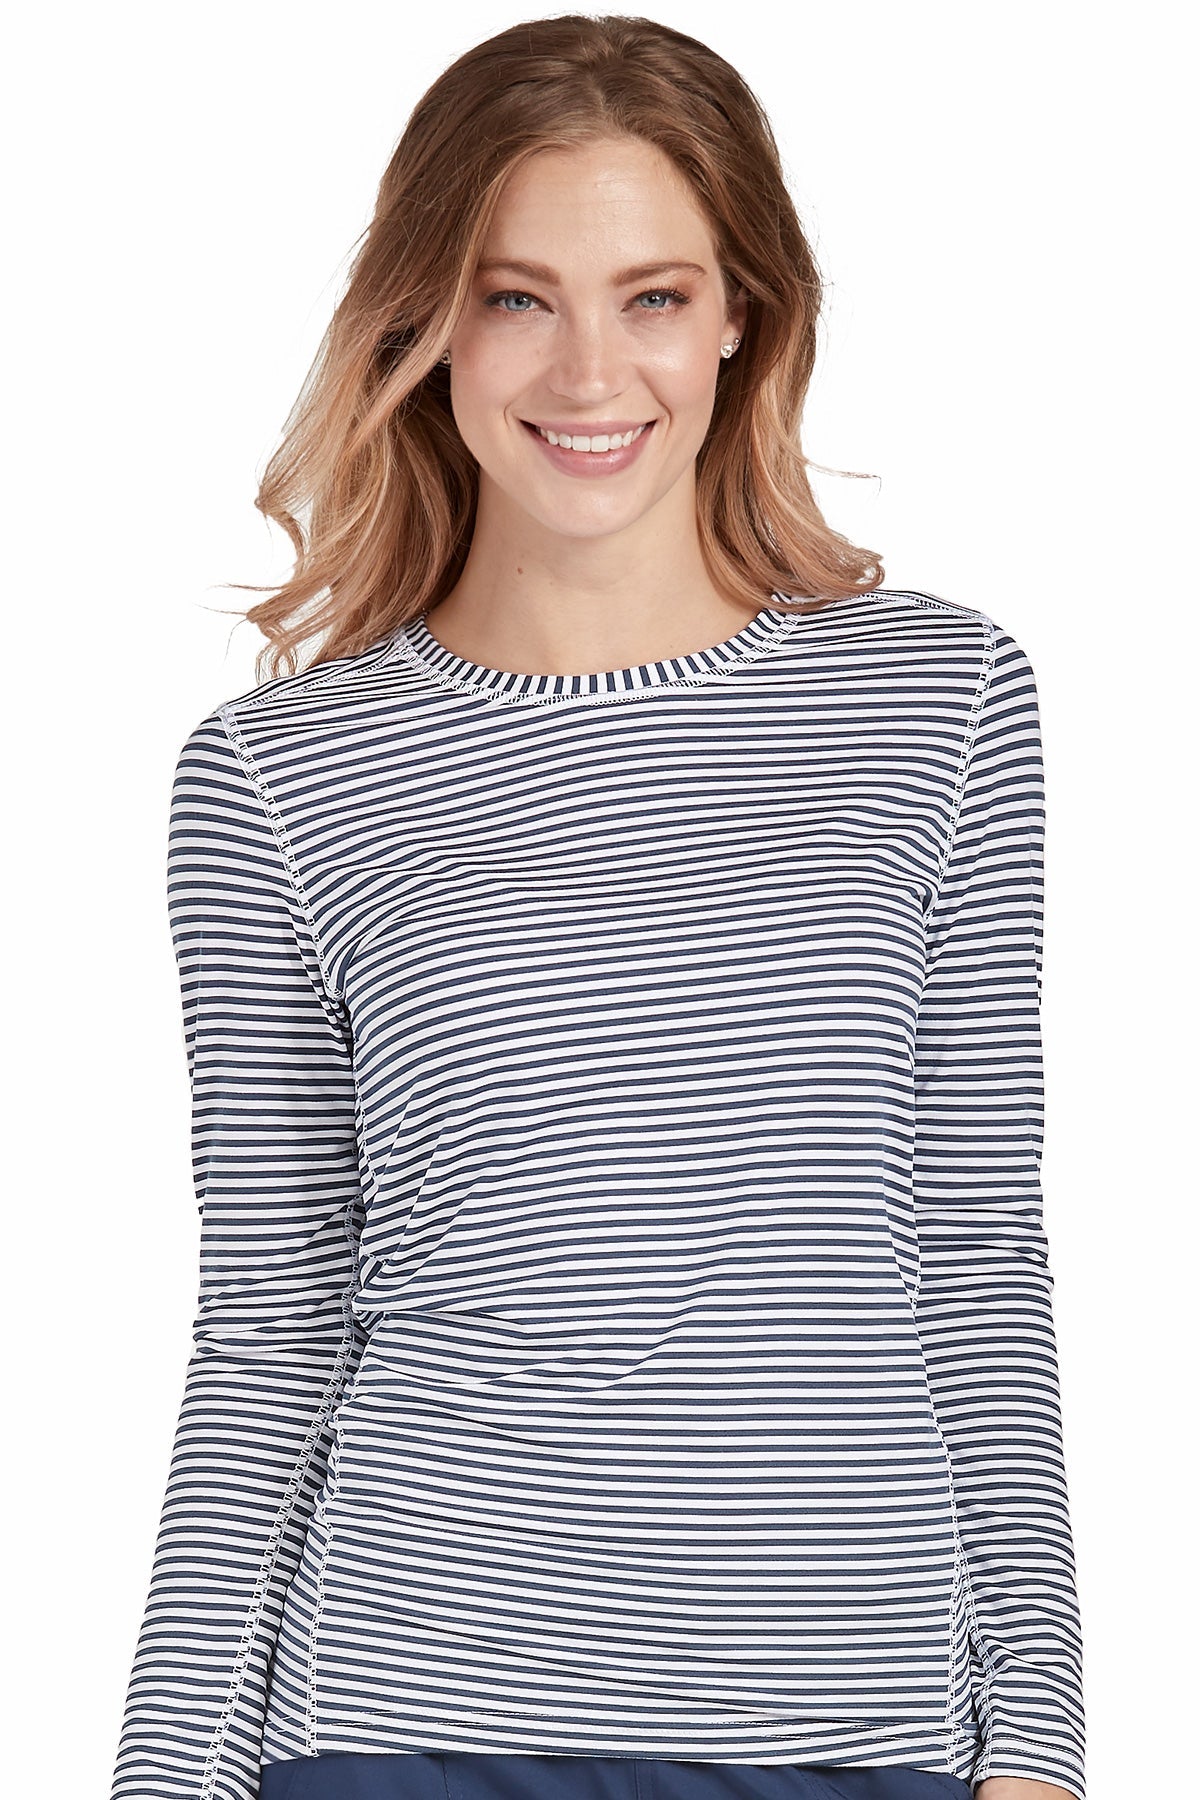 Med Couture Scrub Tee Activate Performance Stripe in Navy and White at Parker's Clothing and Shoes.